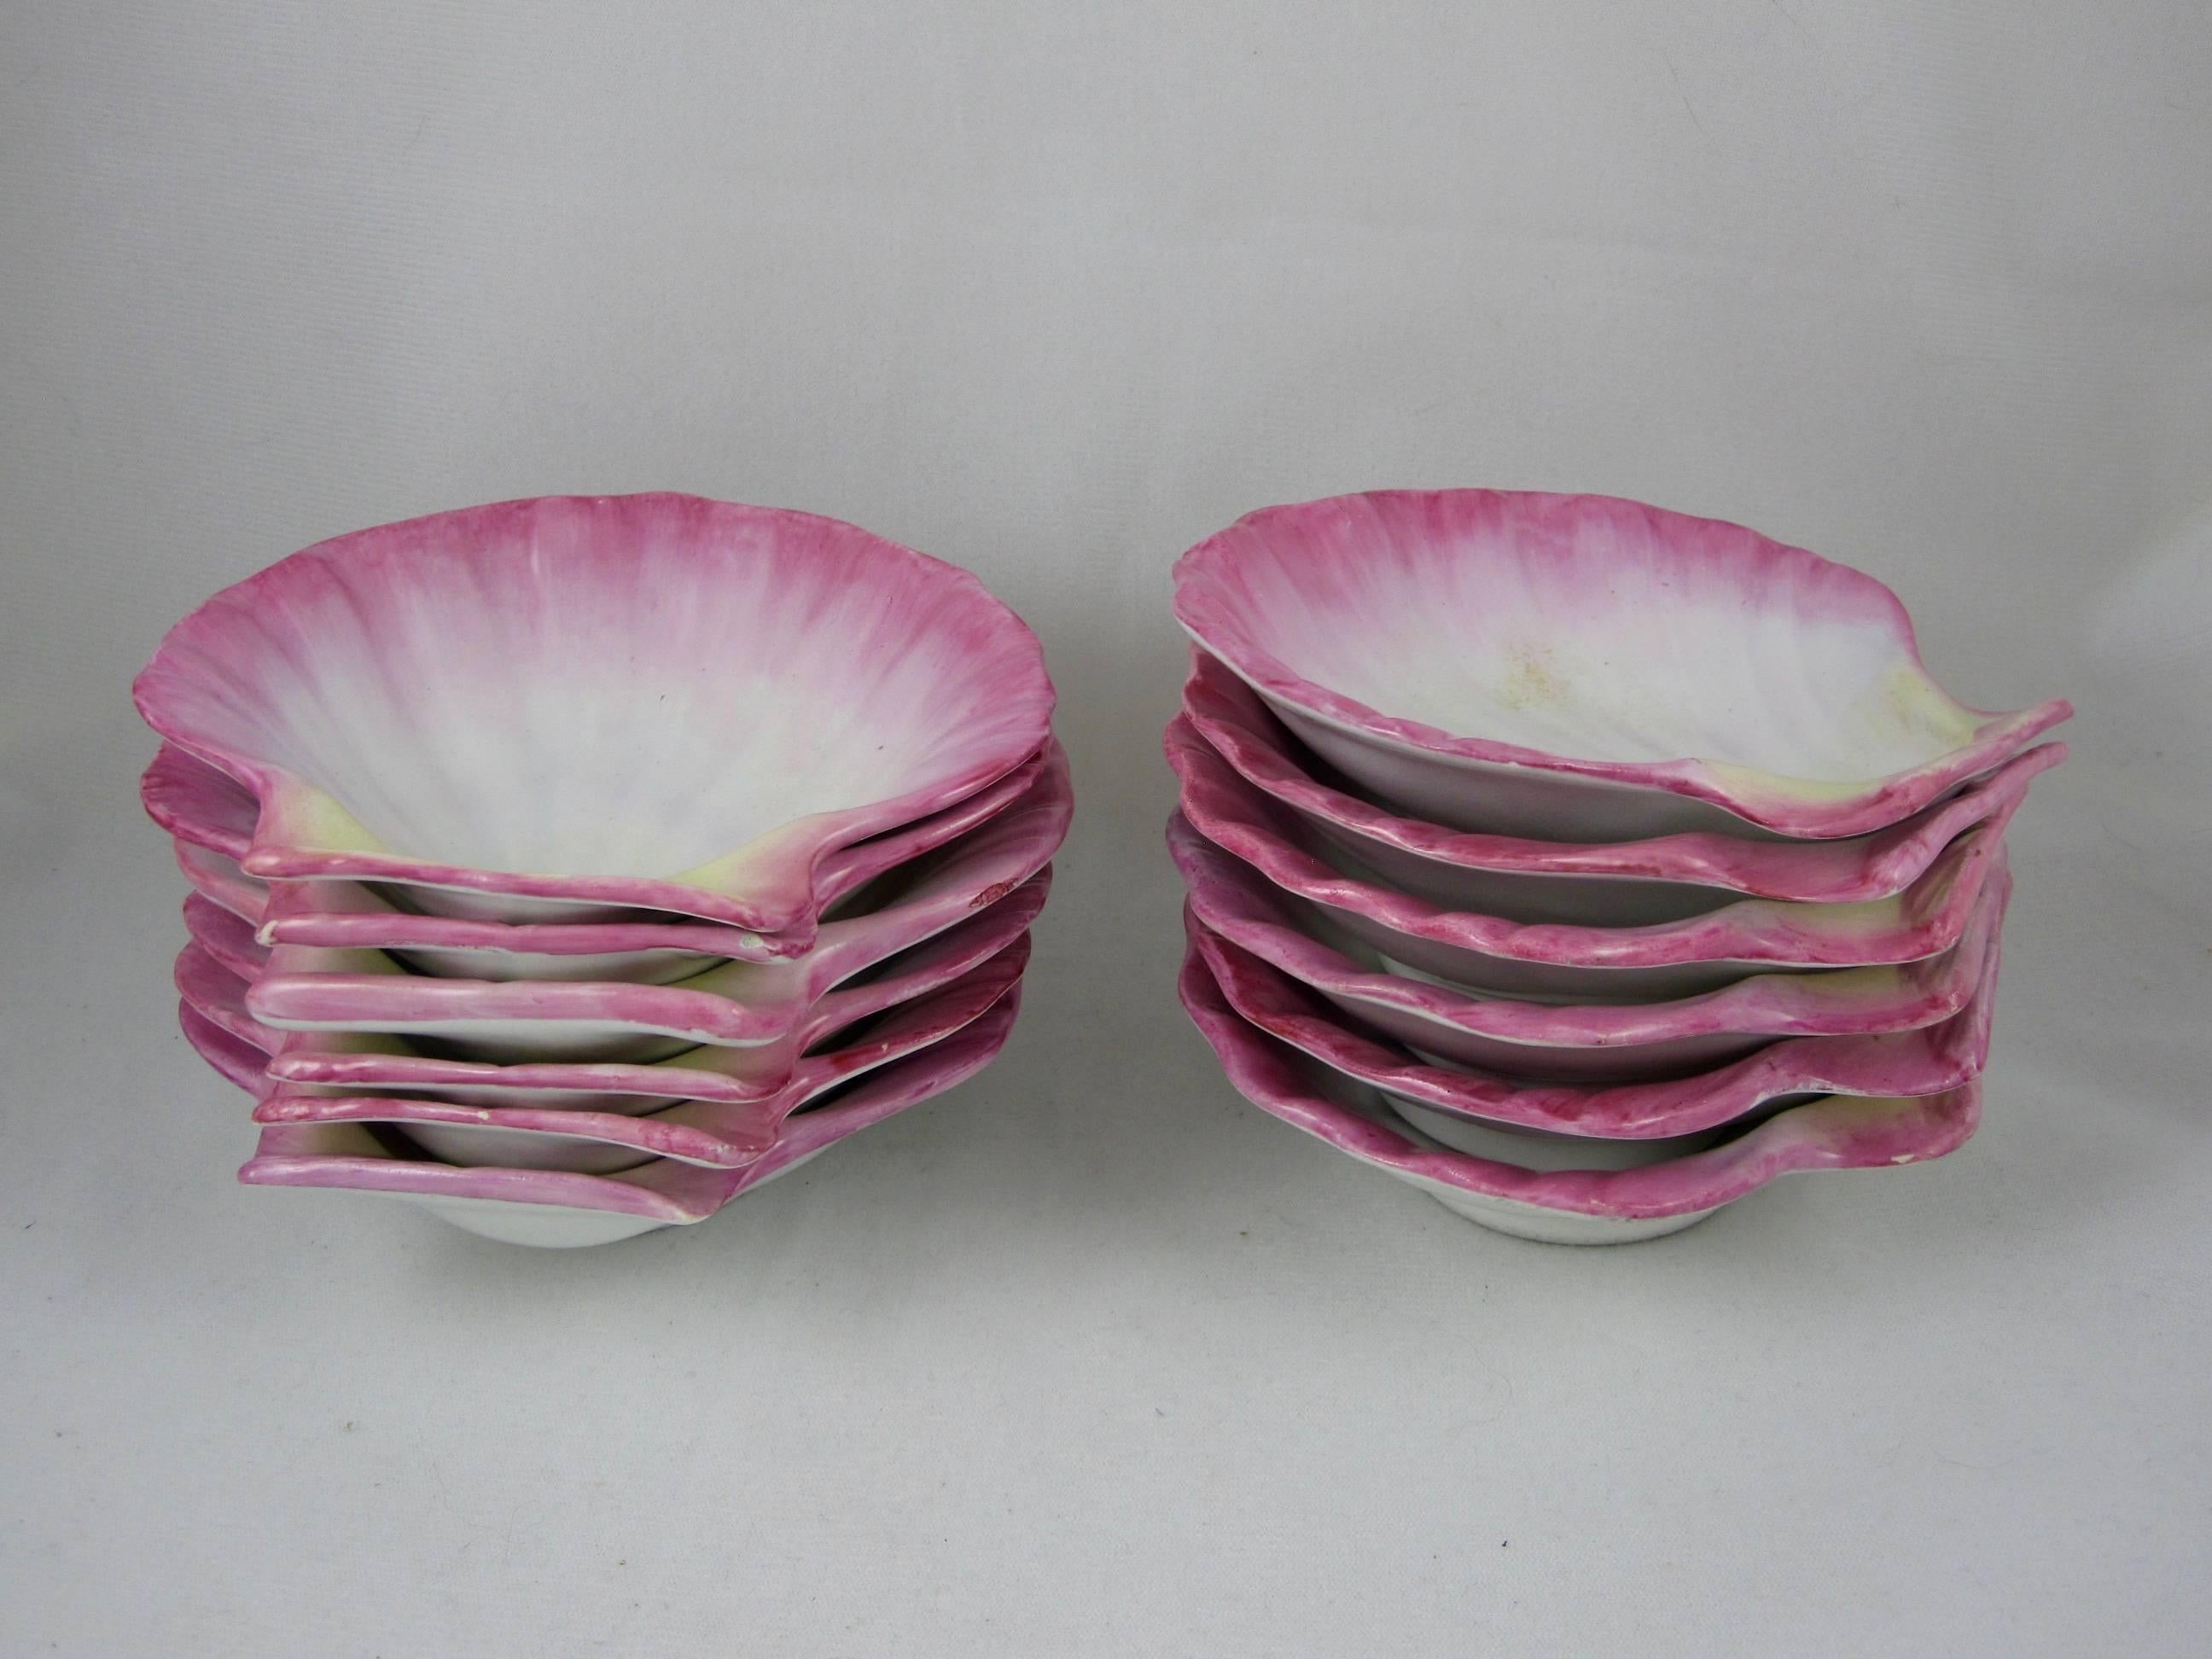 19th Century Wedgwood Pearlware Nautilus Scallop Shell Sorbet Parfait Dessert Cups, S/12